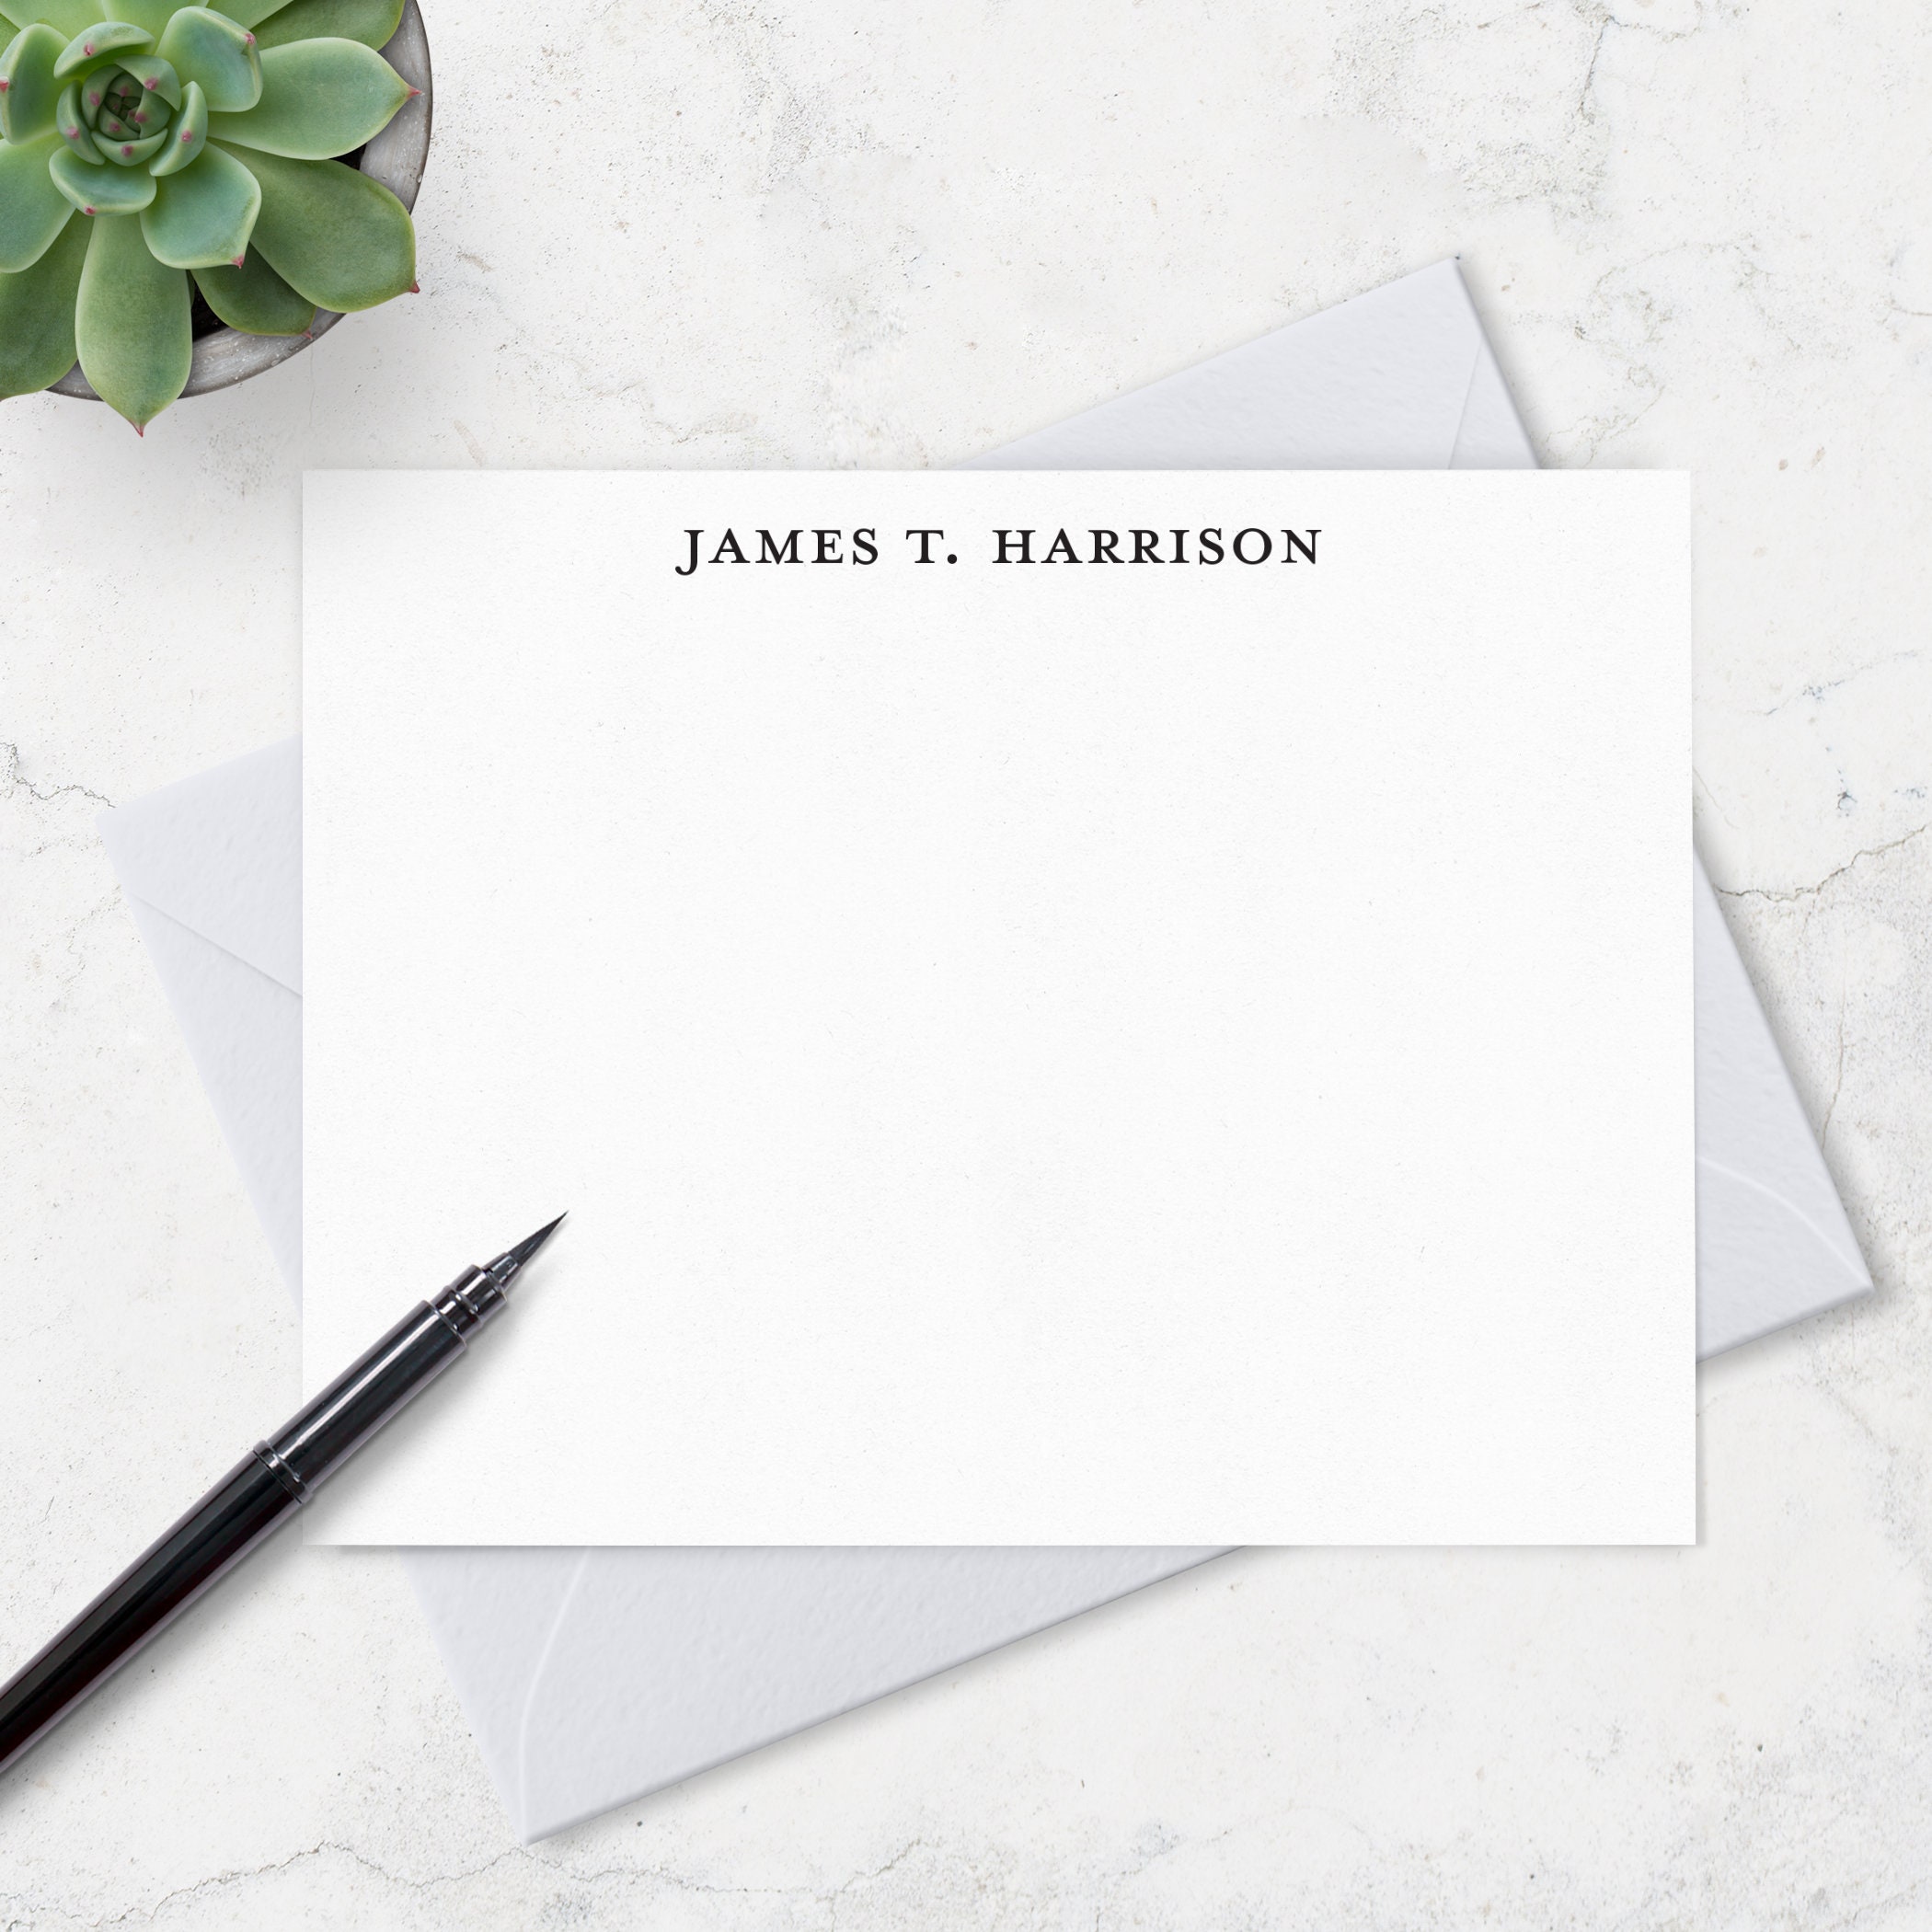 Professional Personalized Stationery Cards / Personalized